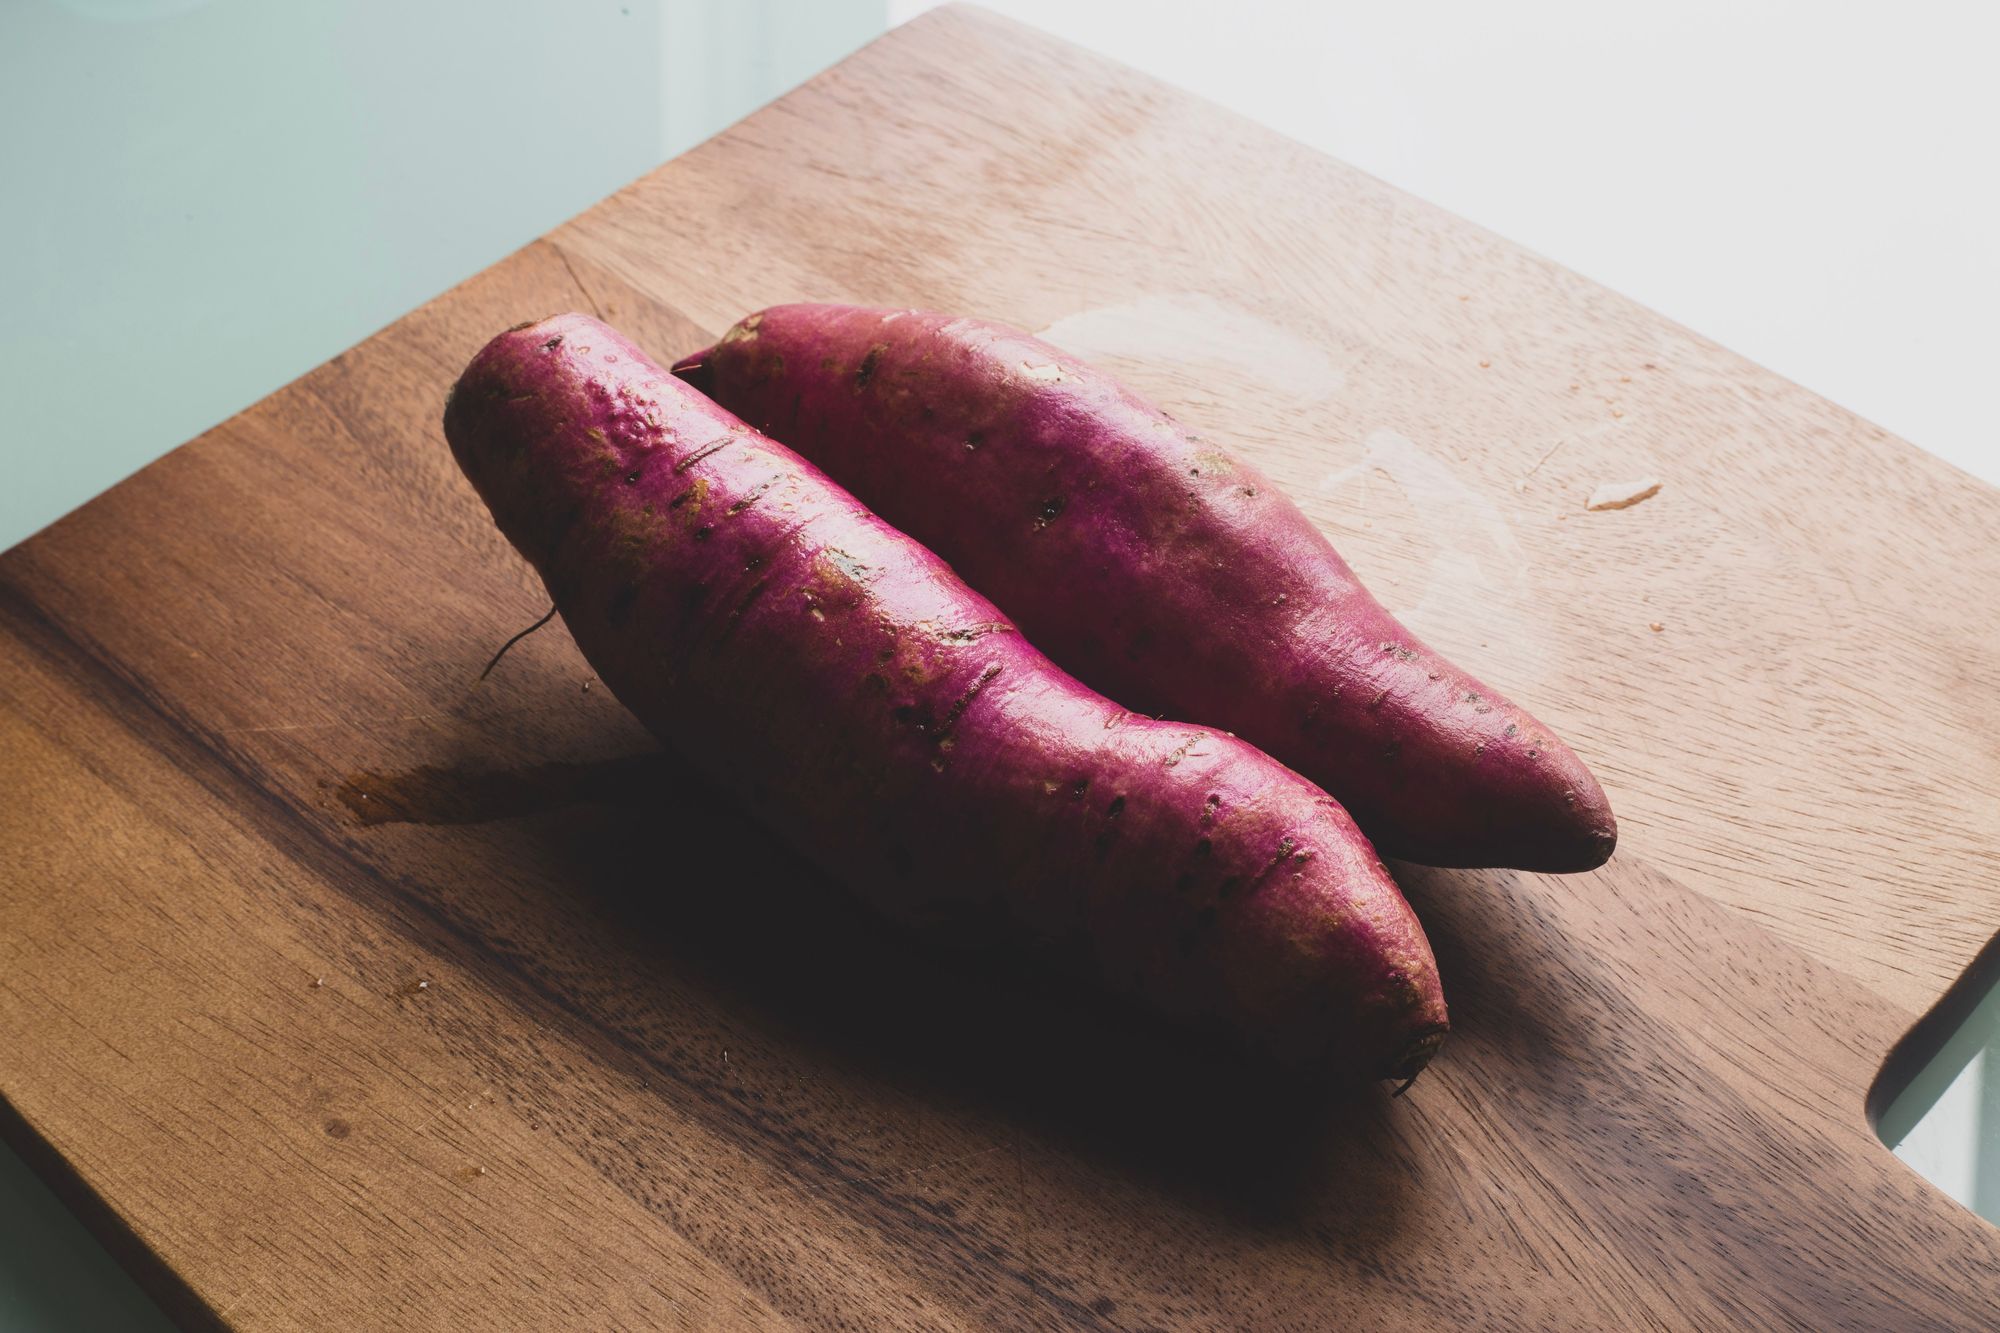 Sweet Potatoes and Nutrition Security